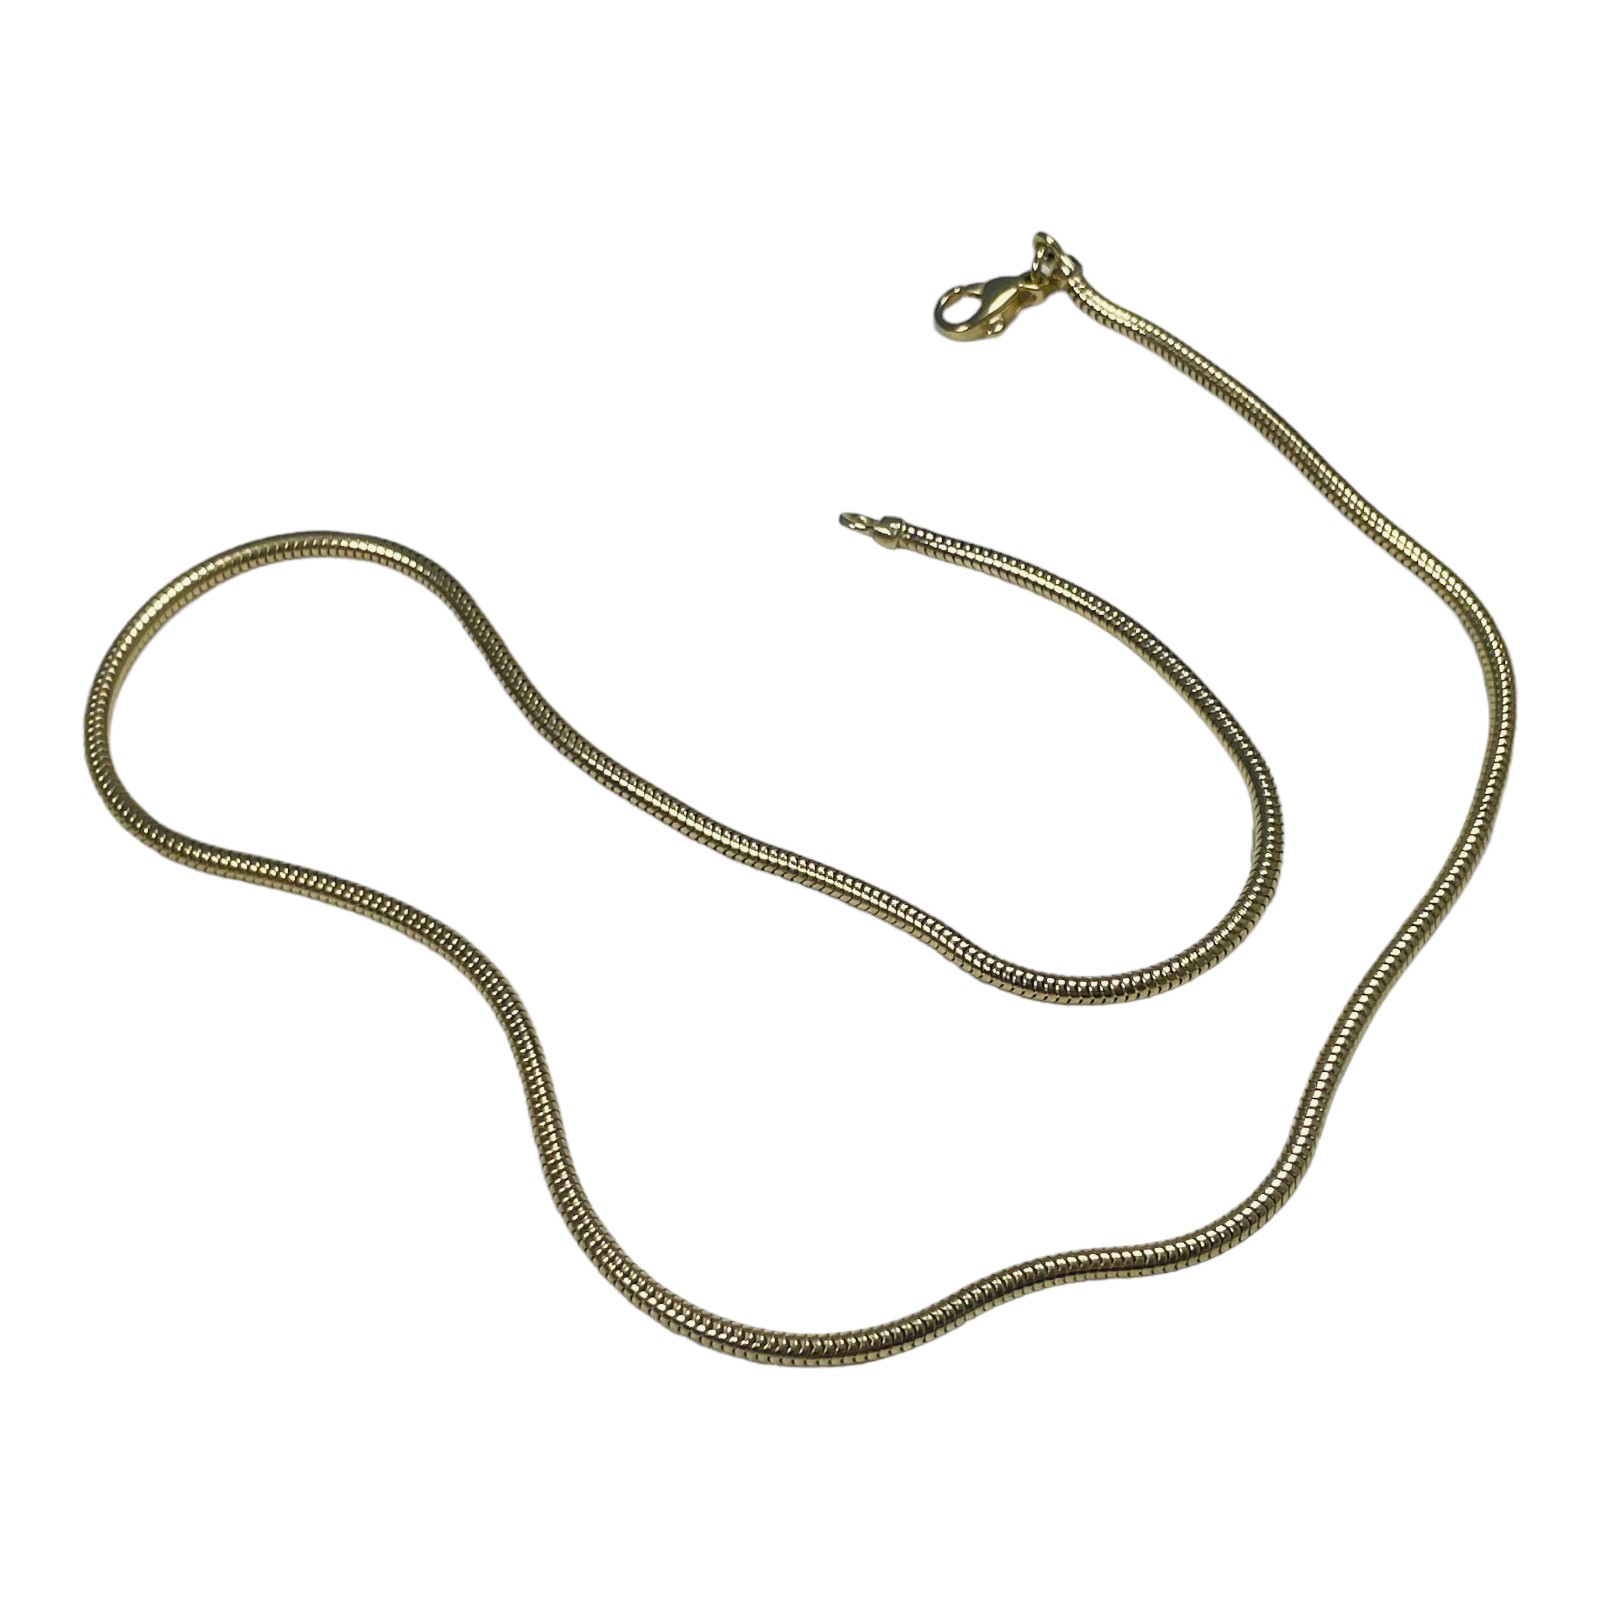 A 9ct yellow gold snake link chain, 18 inches in length, weighs 12.9 grams, Birmingham hallmarks. - Image 6 of 6